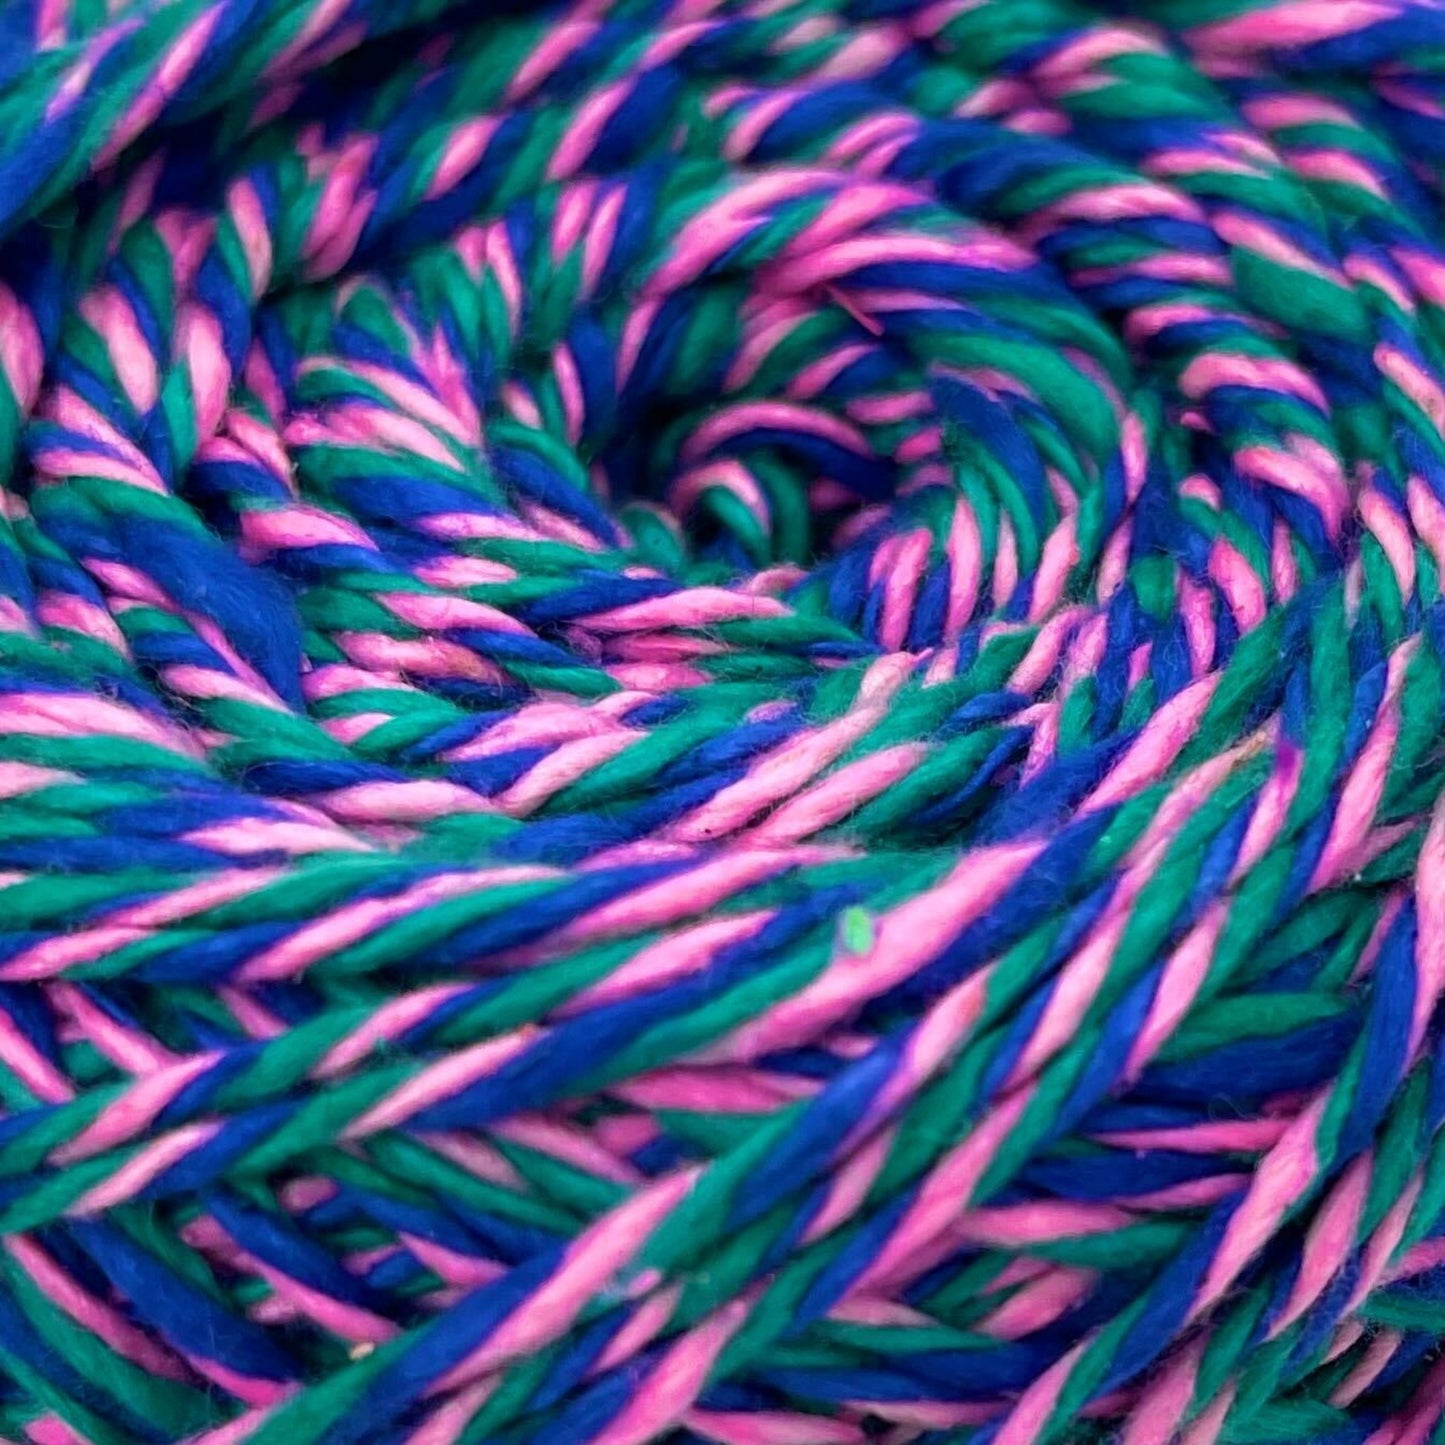 a close up a skein of reclaimed silk yarn on a white background. The yarn is a triple ply yarn with pink, green and navy colors.